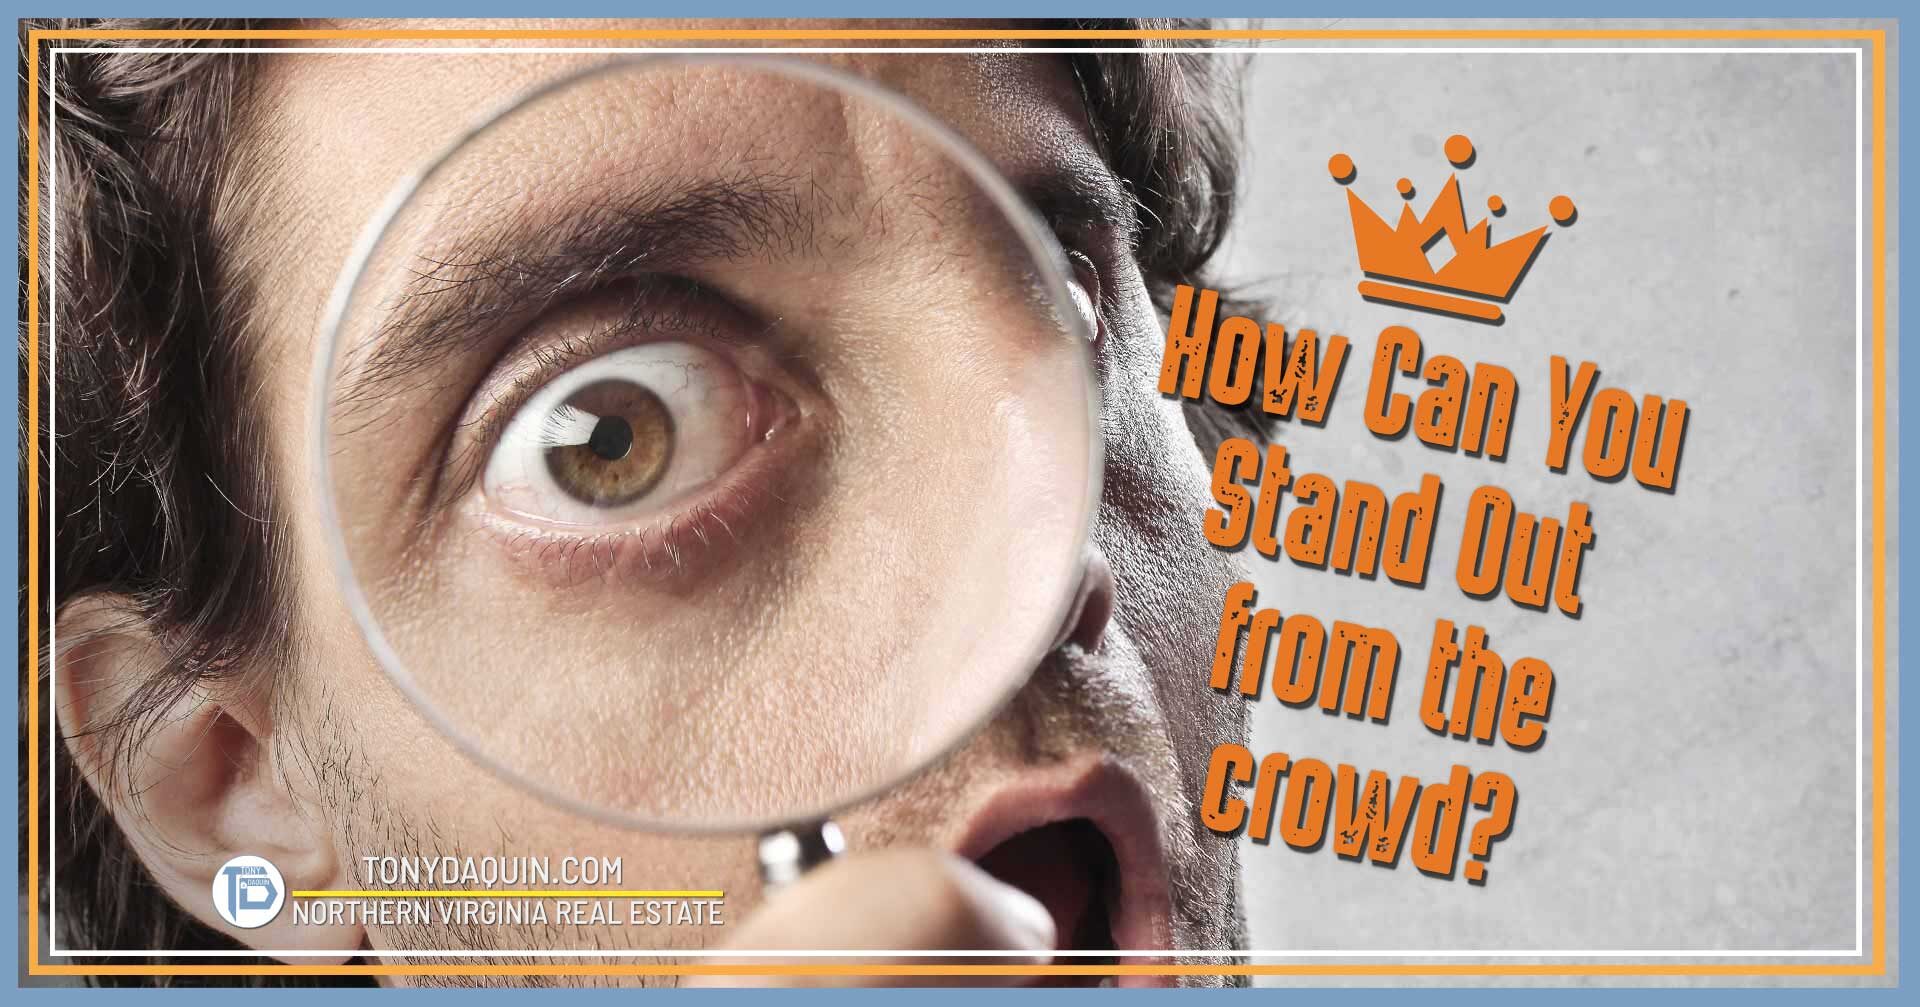 10 things a tenant most do to stand out from the crowd?